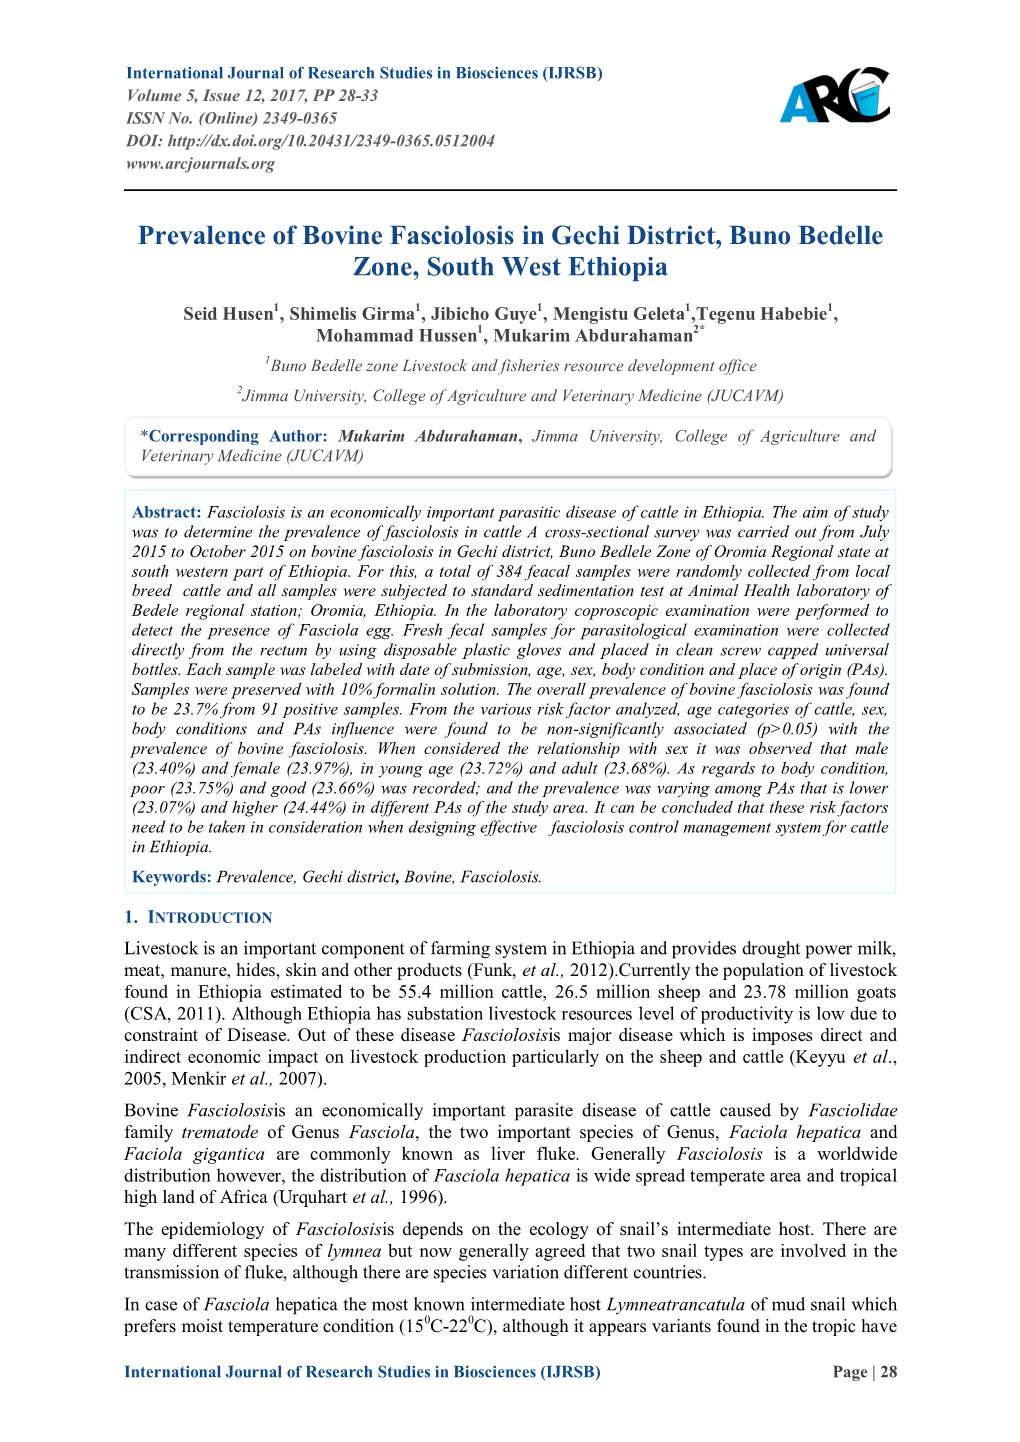 Prevalence of Bovine Fasciolosis in Gechi District, Buno Bedelle Zone, South West Ethiopia